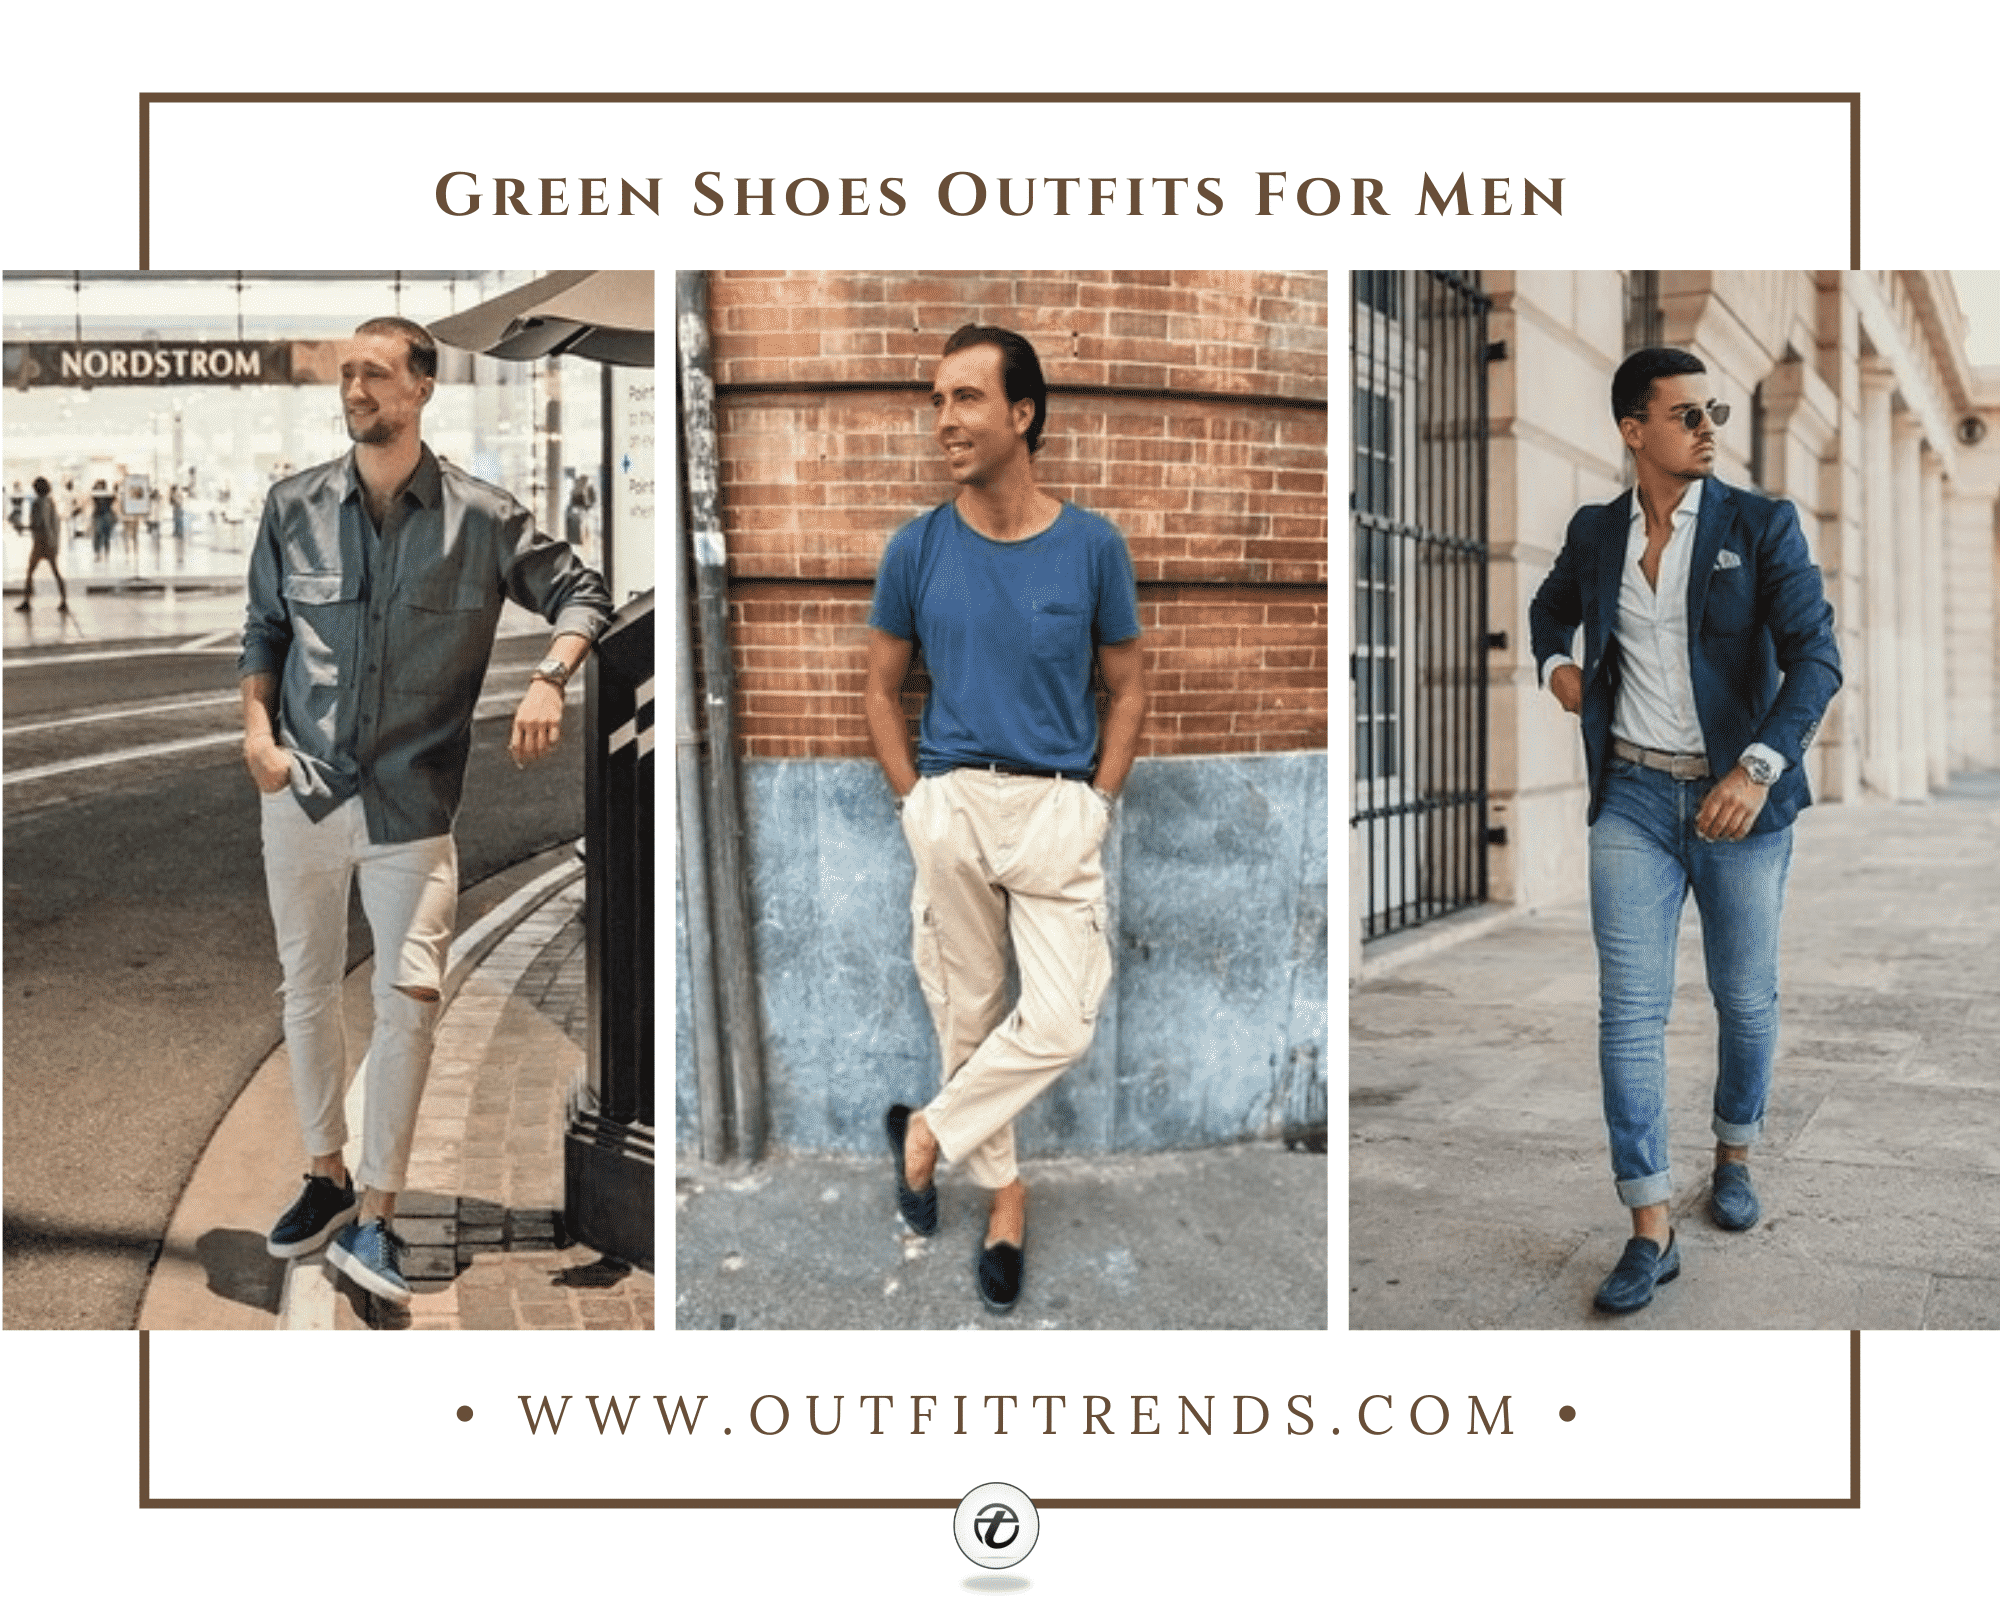 How To Match Jeans With Different Shoe Colors a Visual Coordination Guide 